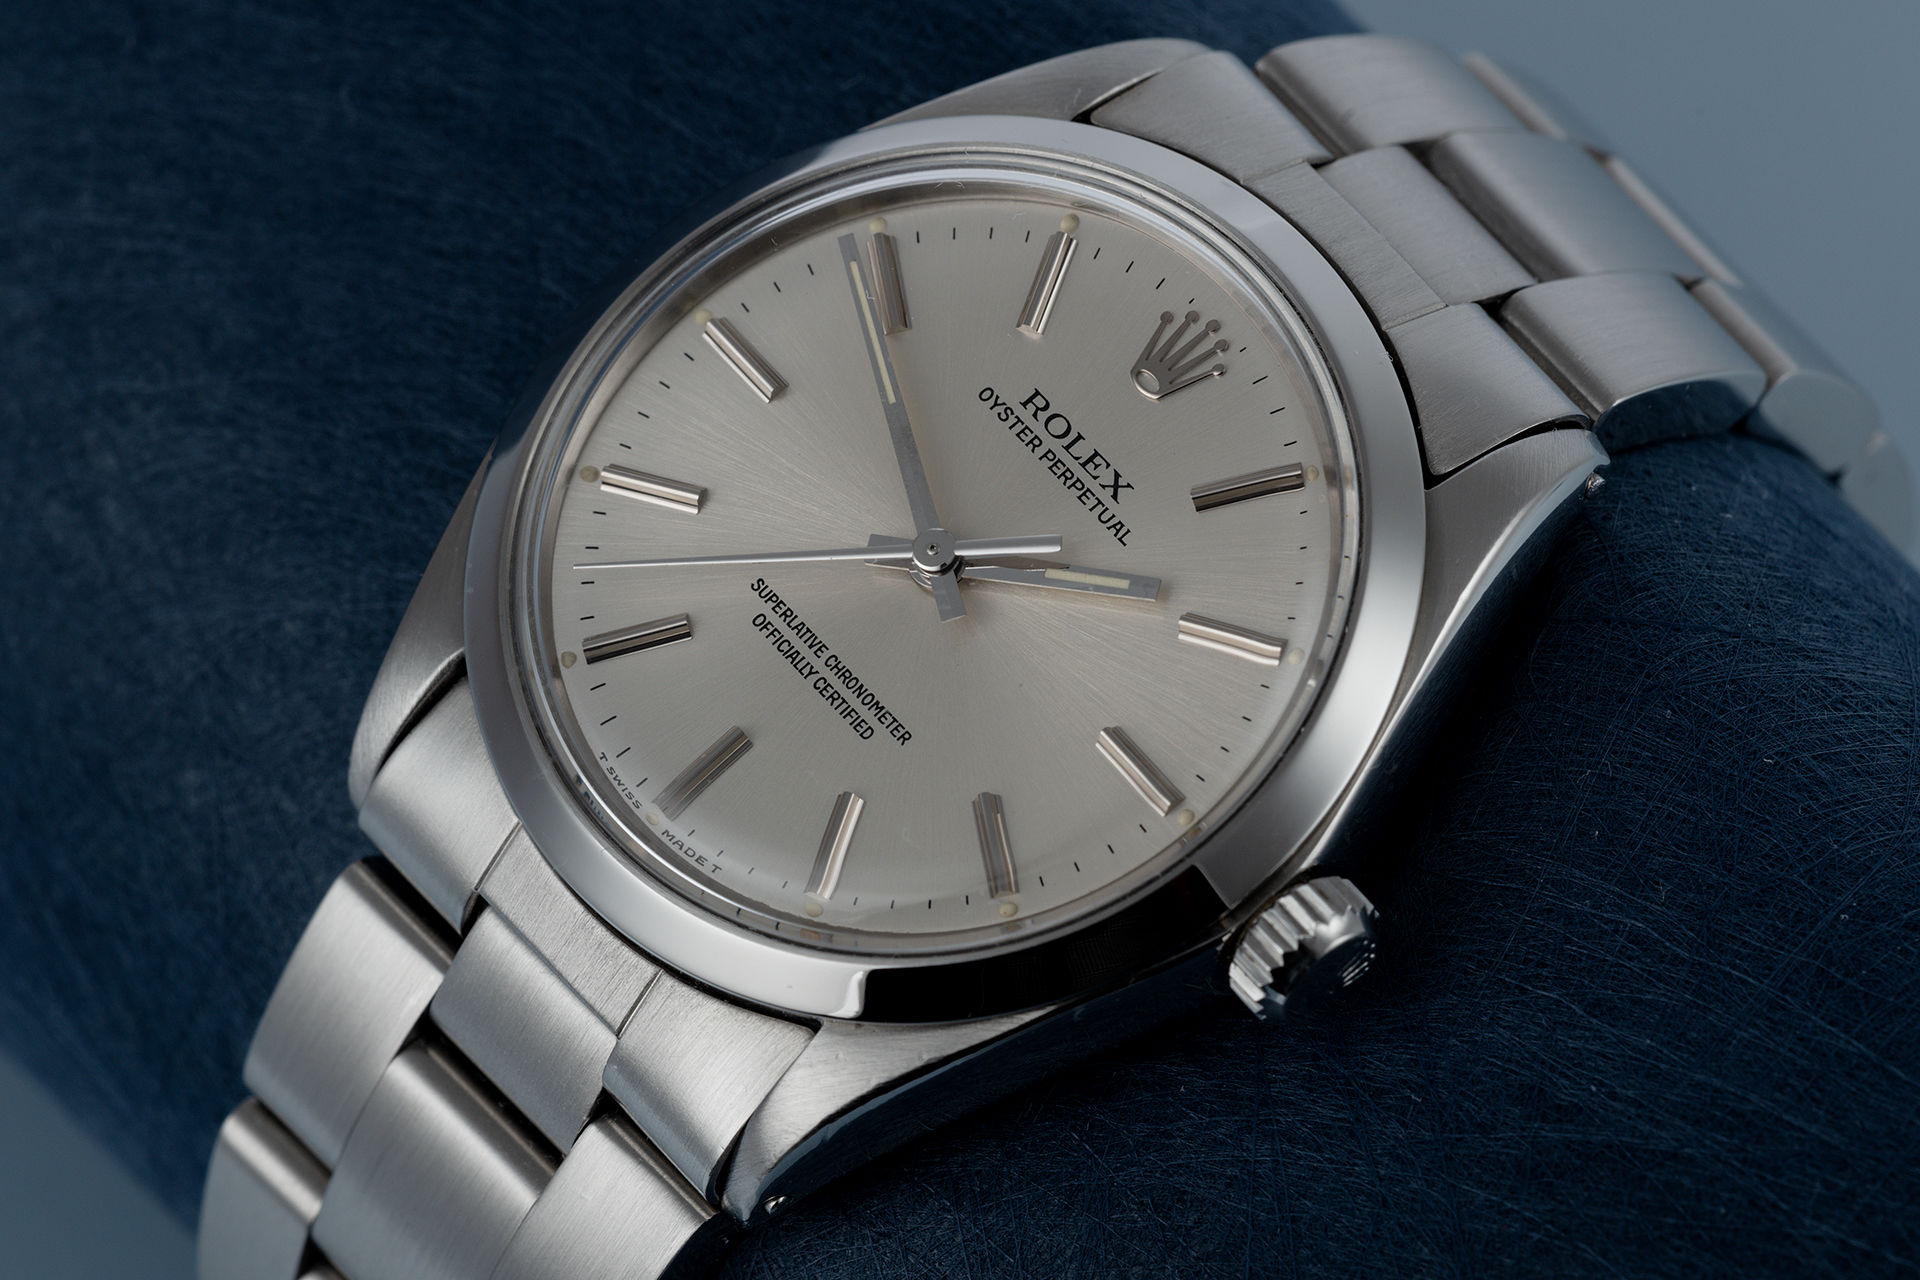 ref 1002 | '1968 Chronometer Certificate' | Rolex Oyster Perpetual